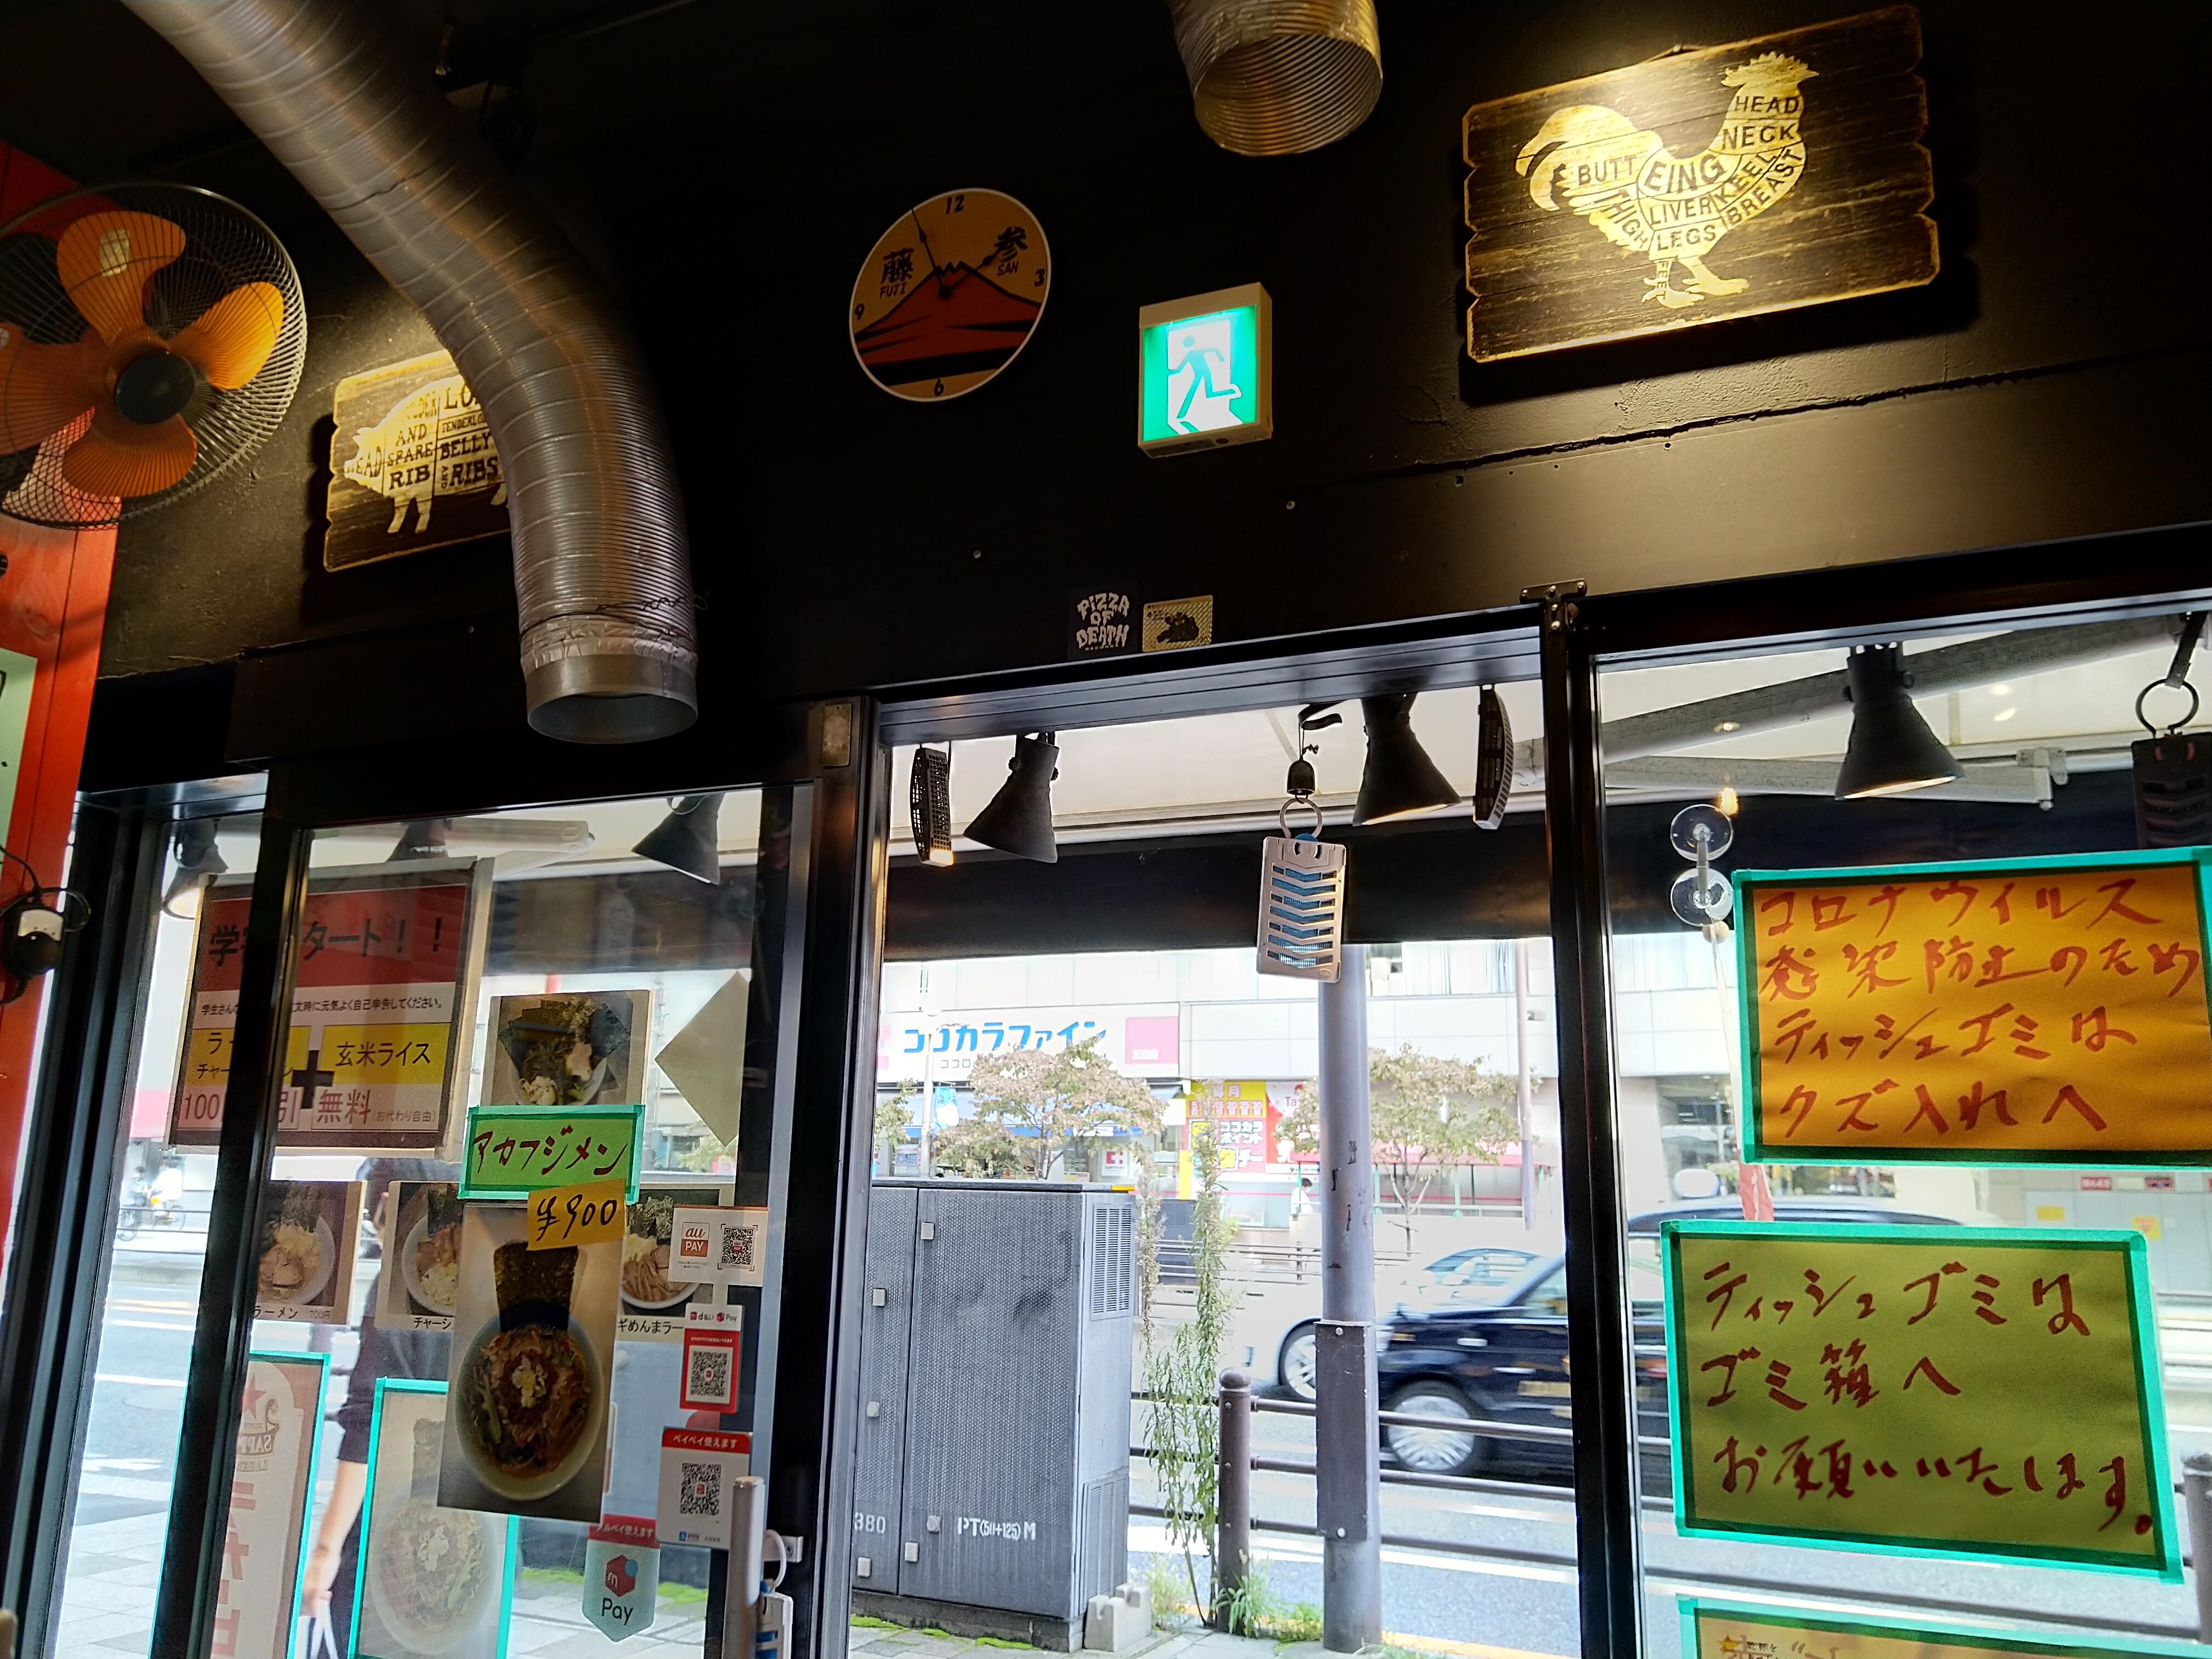 Find the PayPay QR code on the door of this ramen shop!